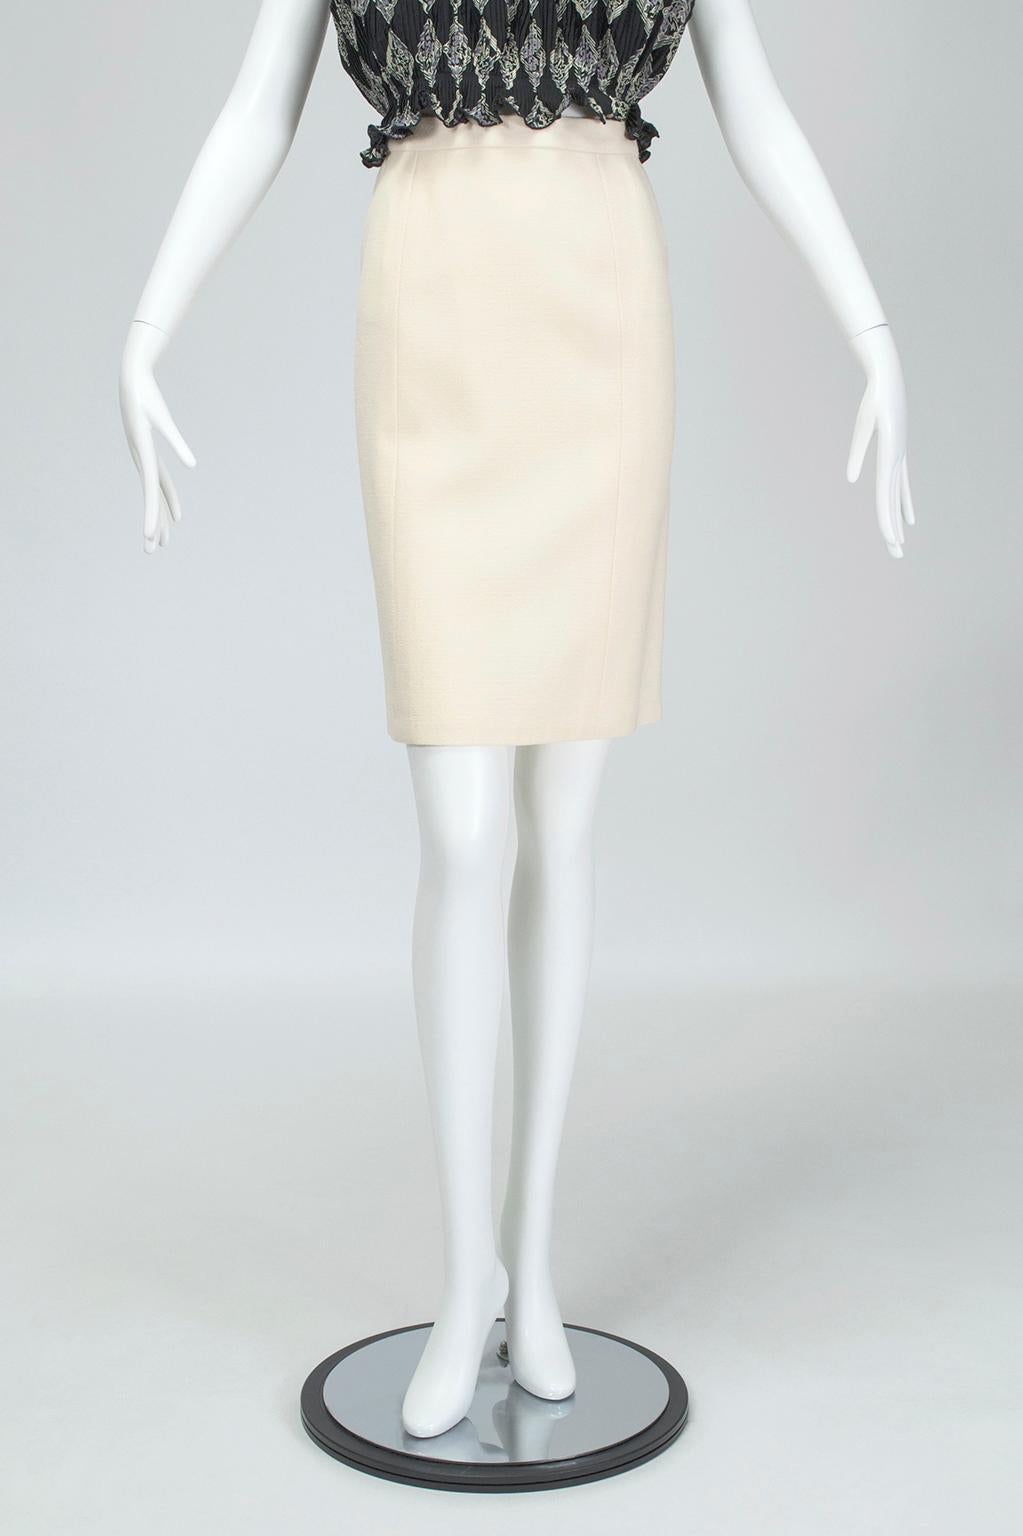 A go-with-everything wardrobe work horse in gently textured wool. Shapely enough to be sexy while still permitting a comfortable stride.

Ivory 7-panel skirt of lightly textured wool; 1 ¼” plain waistband and gentle A-line shape. Hidden zipper